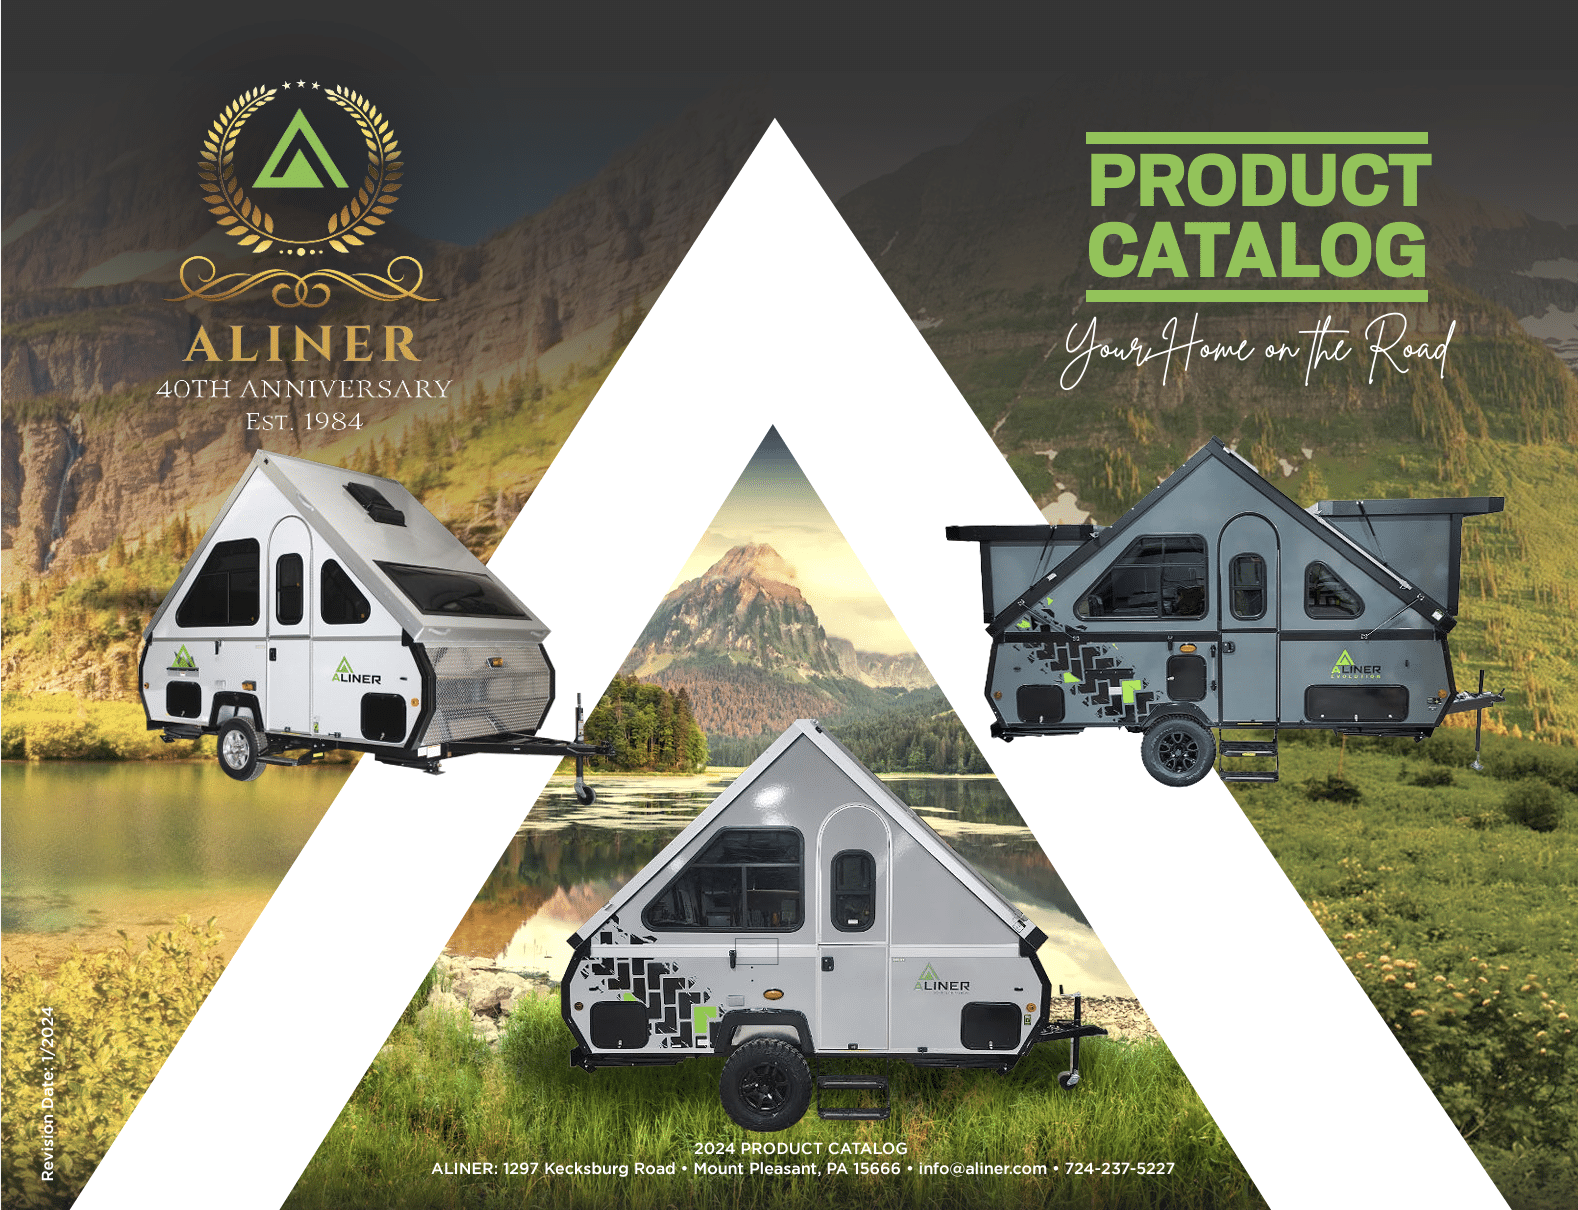 Aliner 40th anniversary product catalog featuring various camper models with a picturesque mountain backdrop.